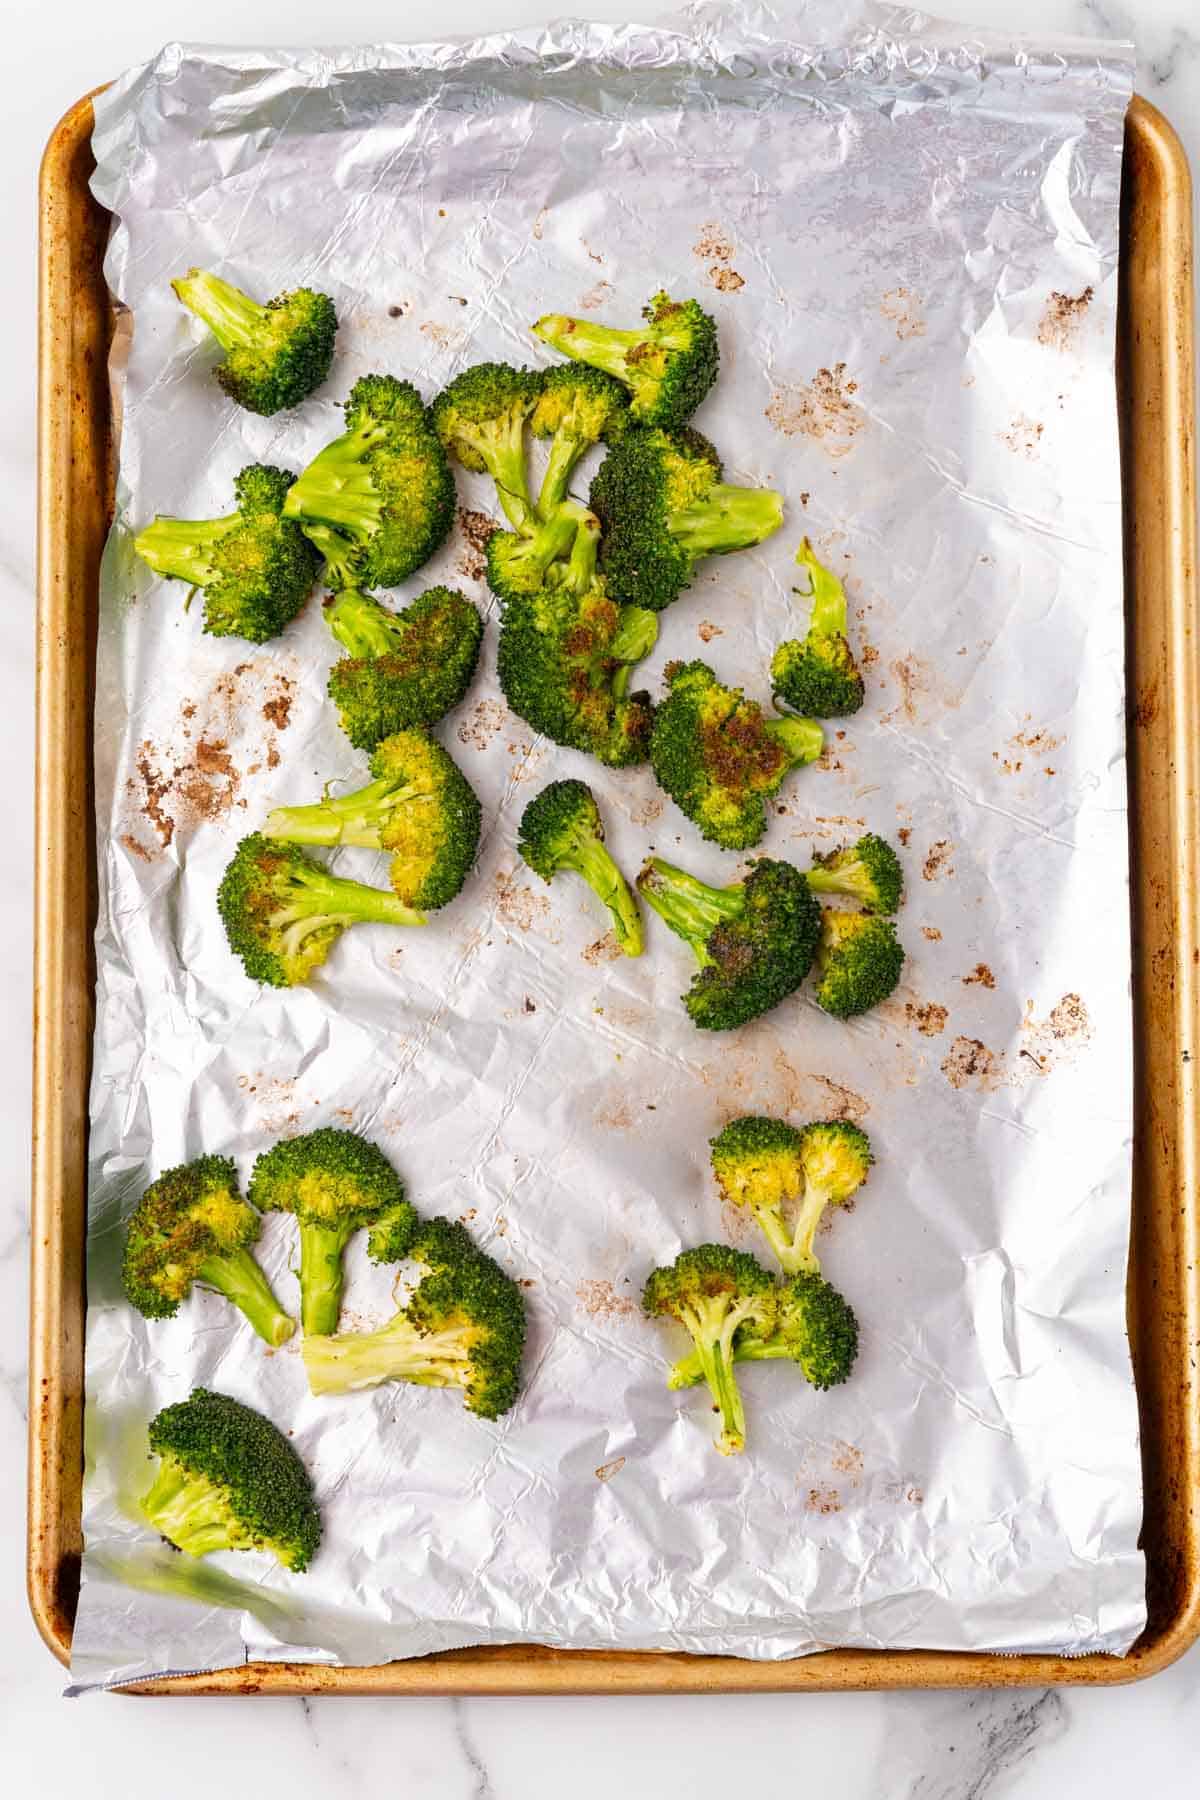 Roasted broccoli florets on a baking sheet lined with aluminum foil, as seen from above